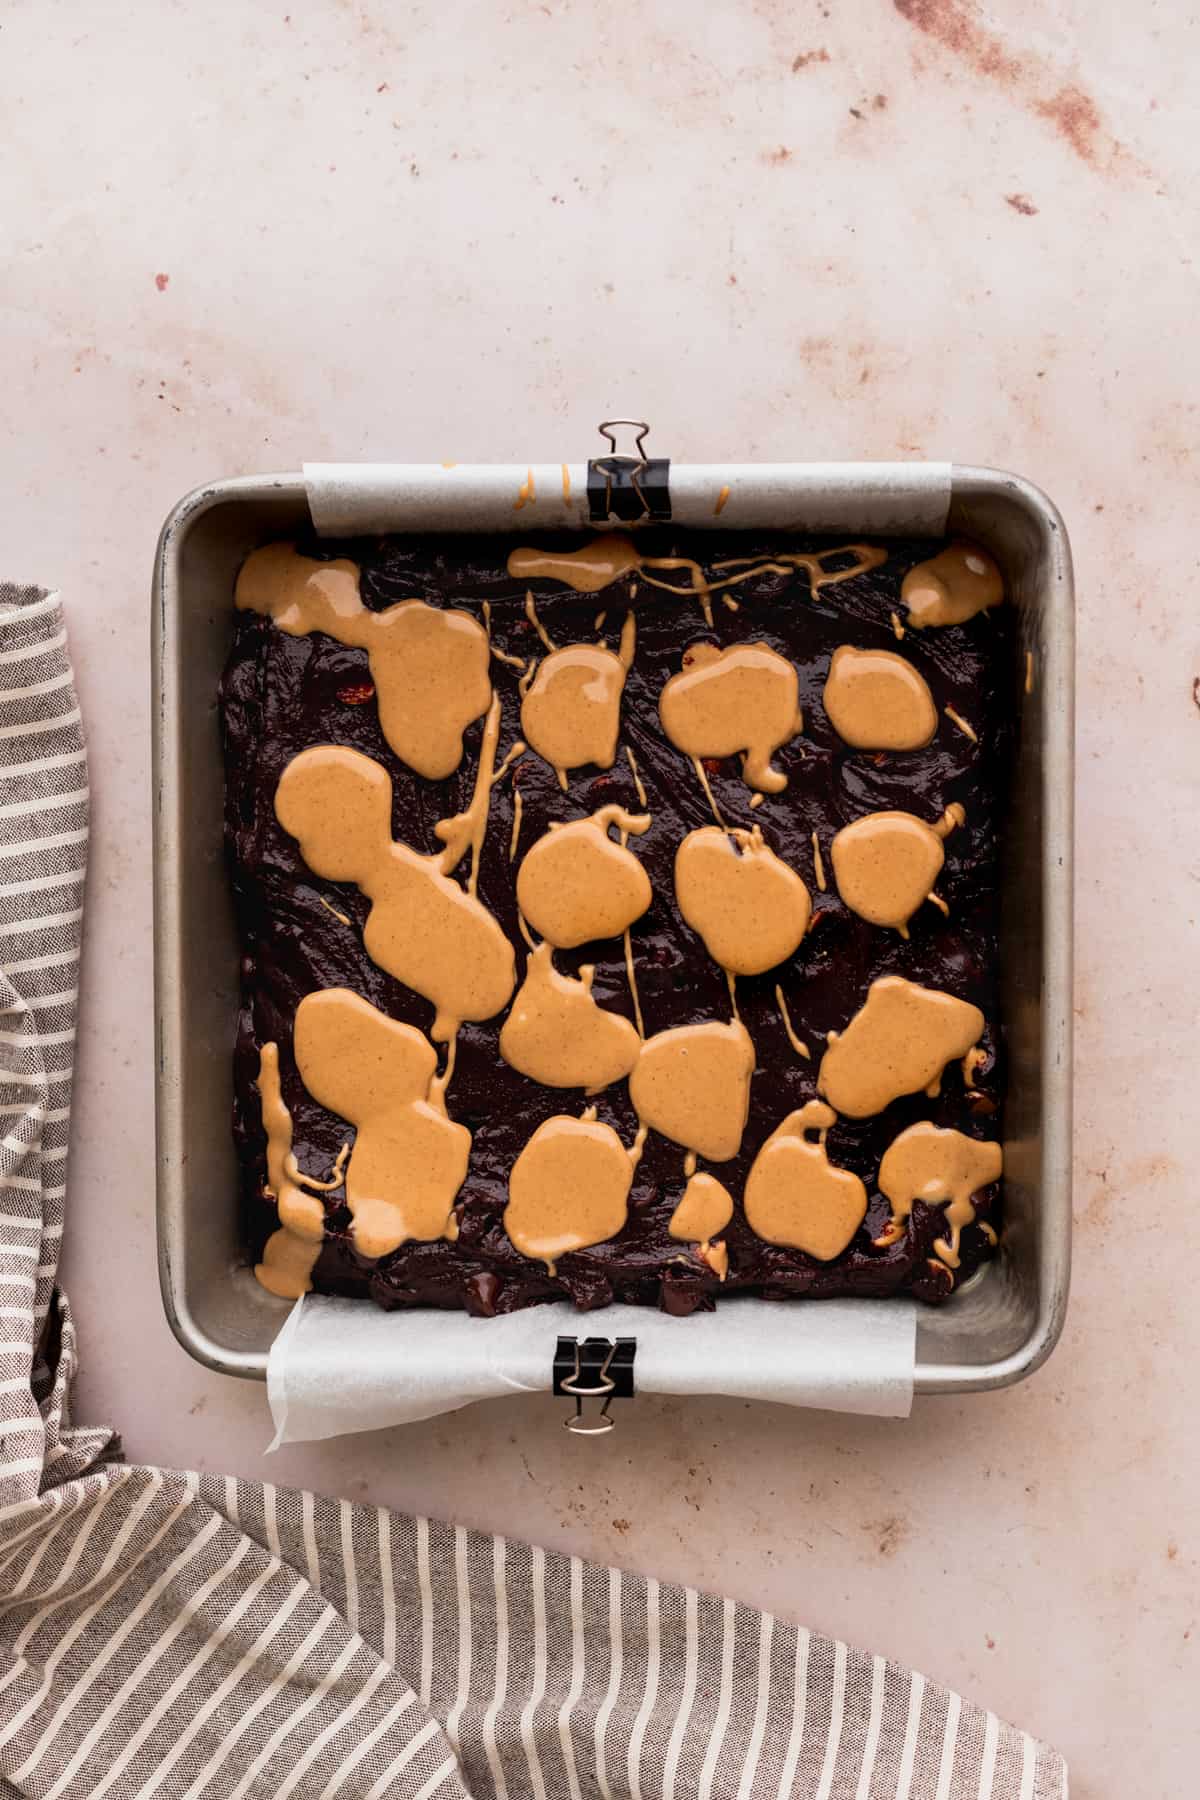 Peanut butter dollops on top of brownie batter.